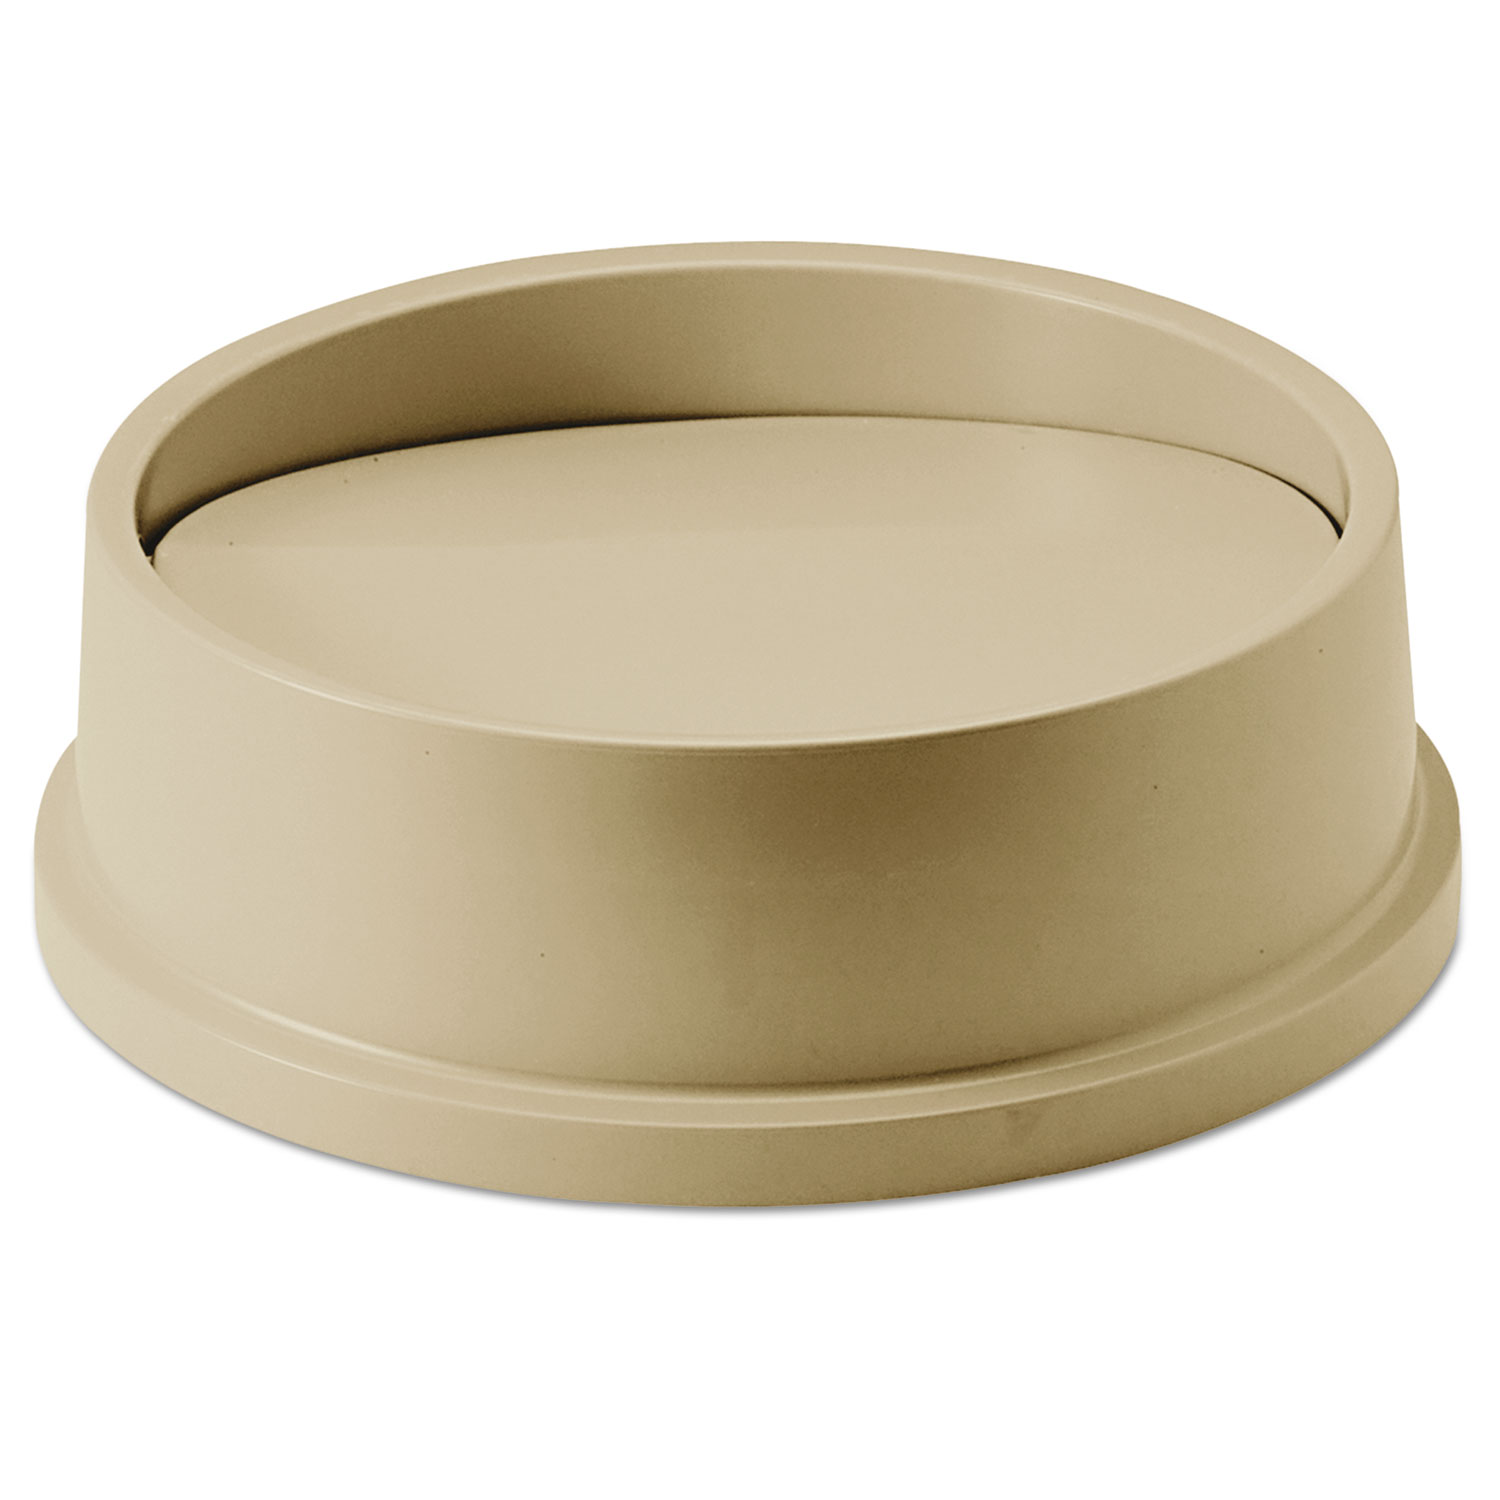  Rubbermaid Commercial FG267200BEIG Swing Top Lid for Round Waste Container, Plastic, Beige (RCP267200BG) 